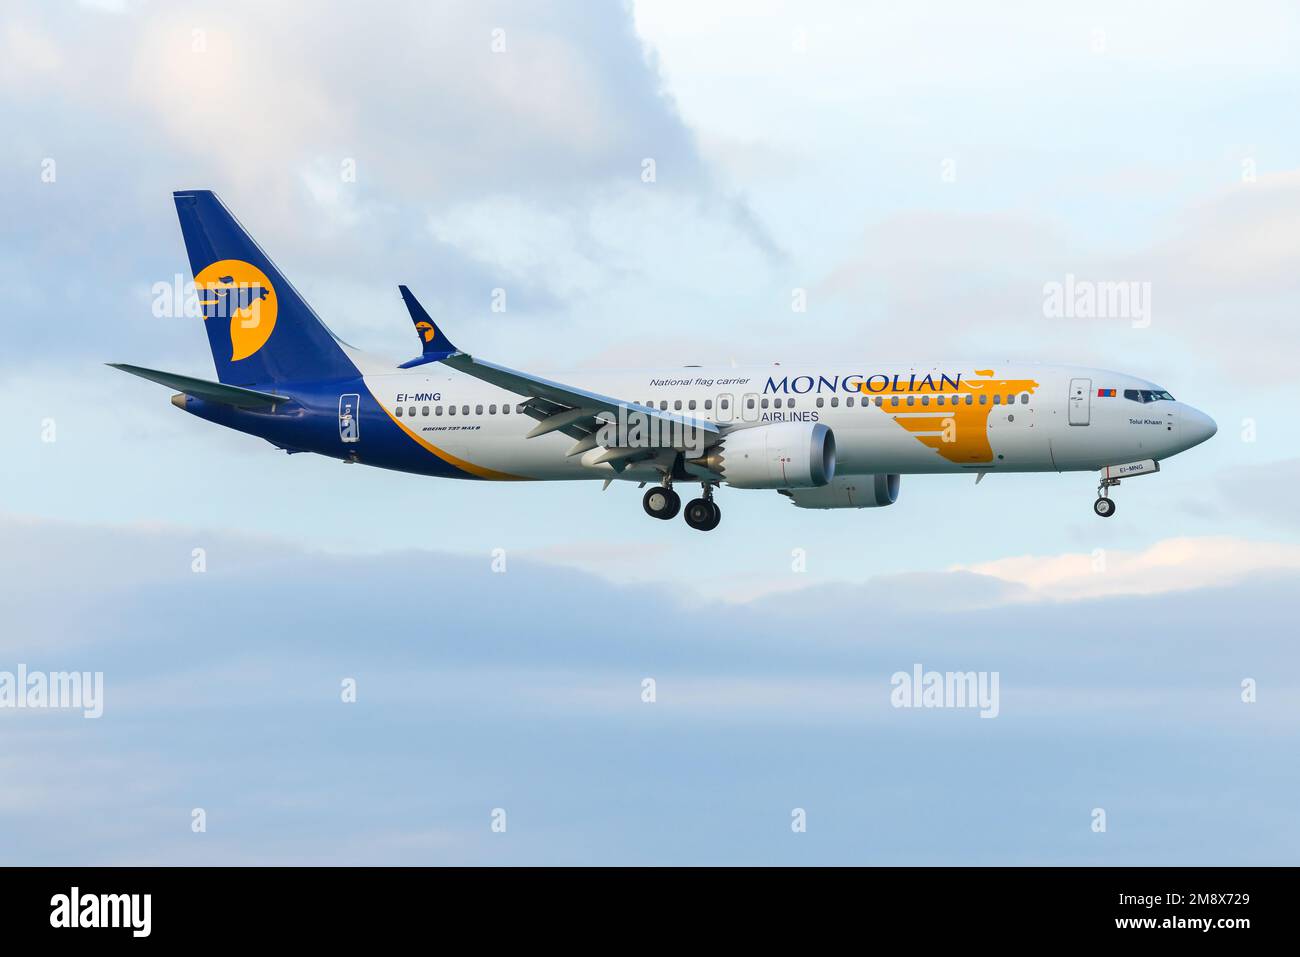 MIAT Mongolian Airlines Boeing 737 Max aircraft. Airline from Mongolia, MIAT Boeing 737 airplane. Stock Photo